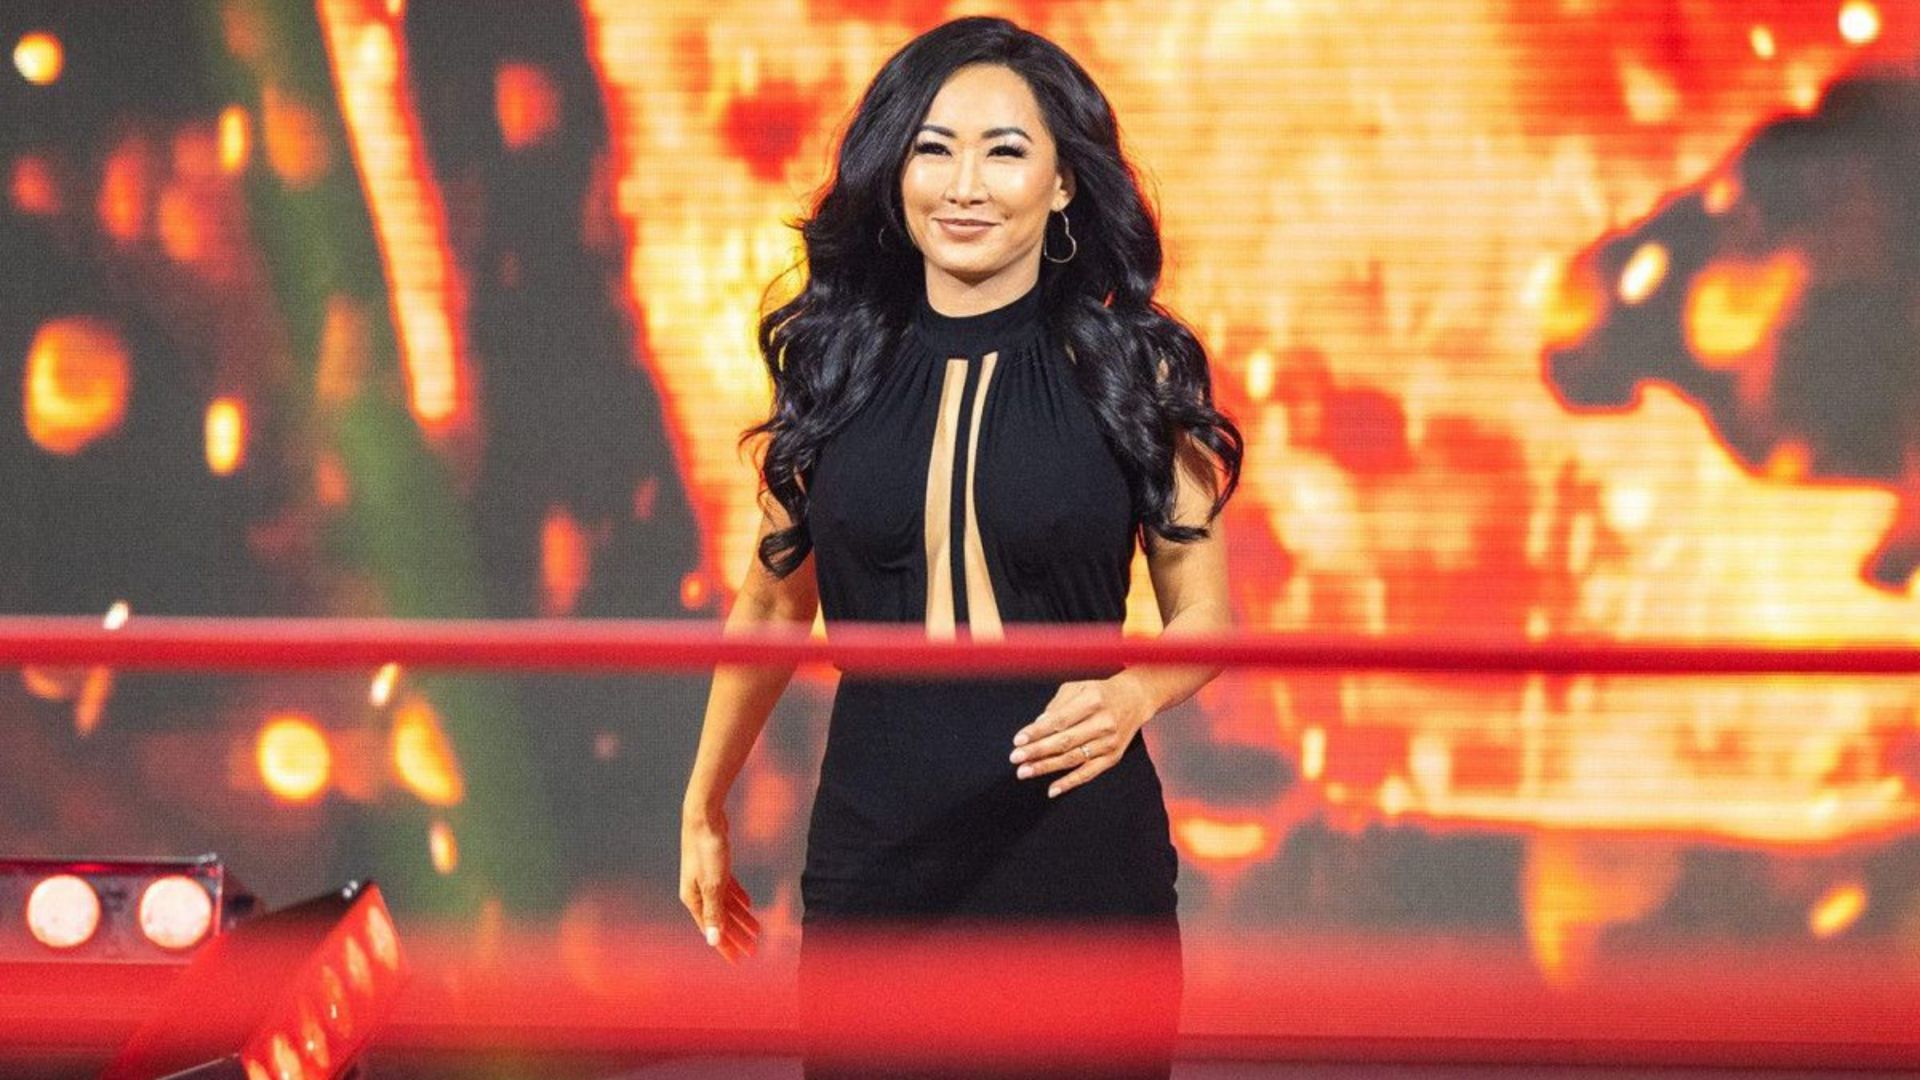 Gail Kim is currently a producer in IMPACT Wrestling